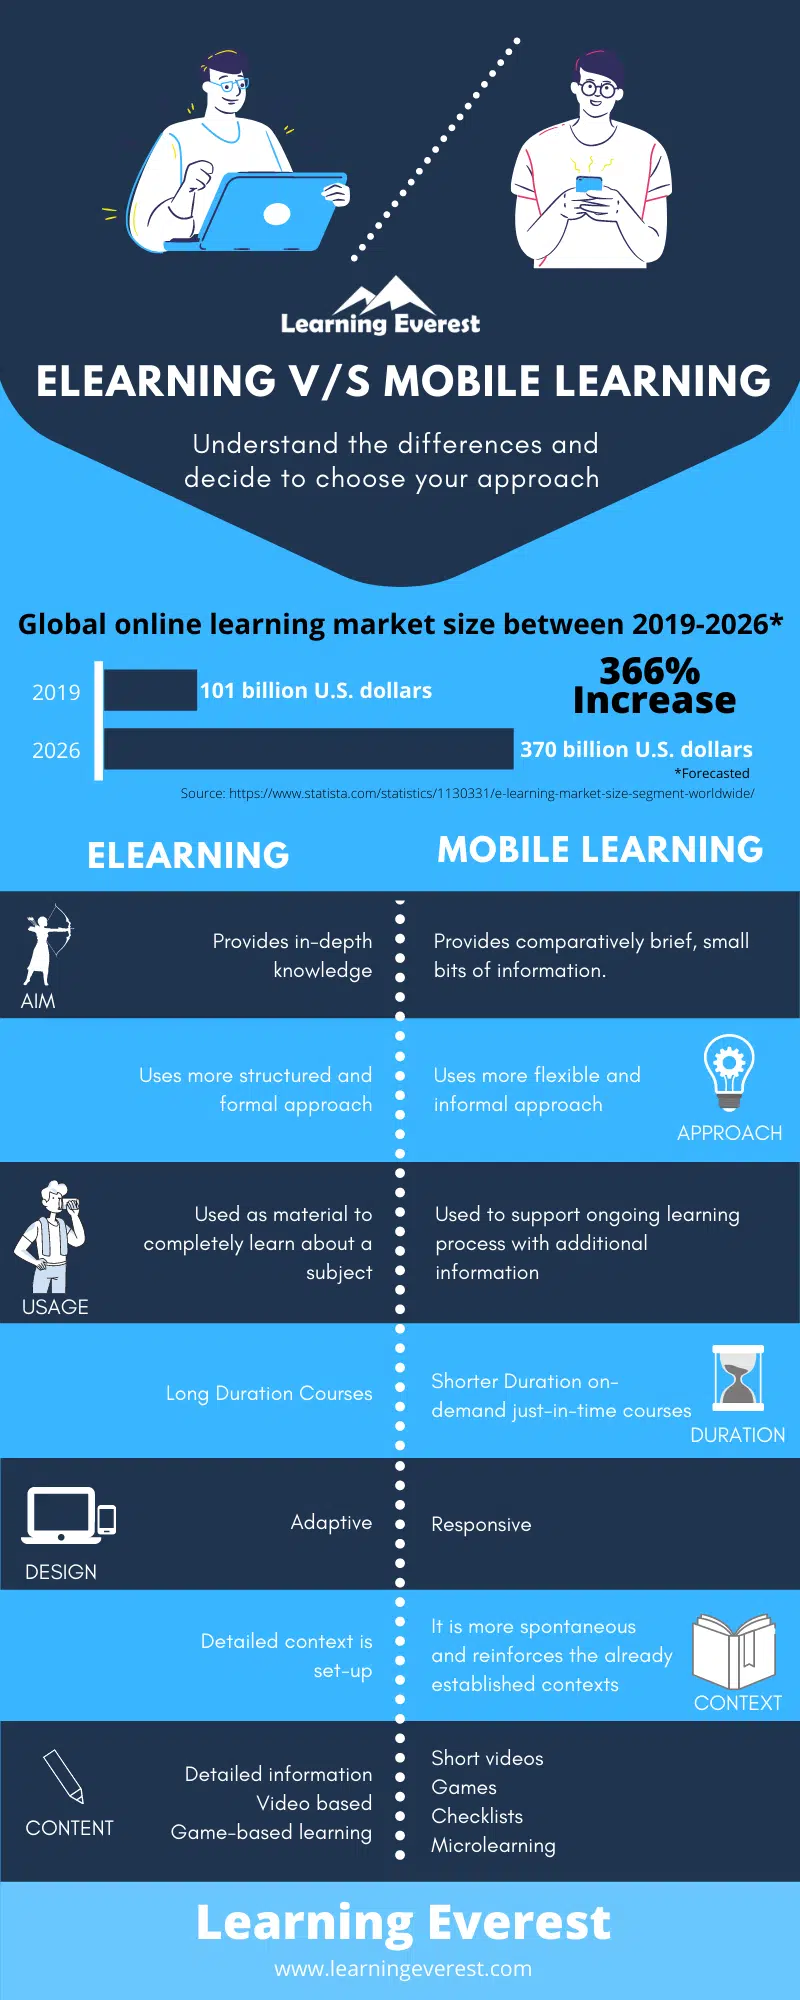 Corporate Learning Trends in 2022